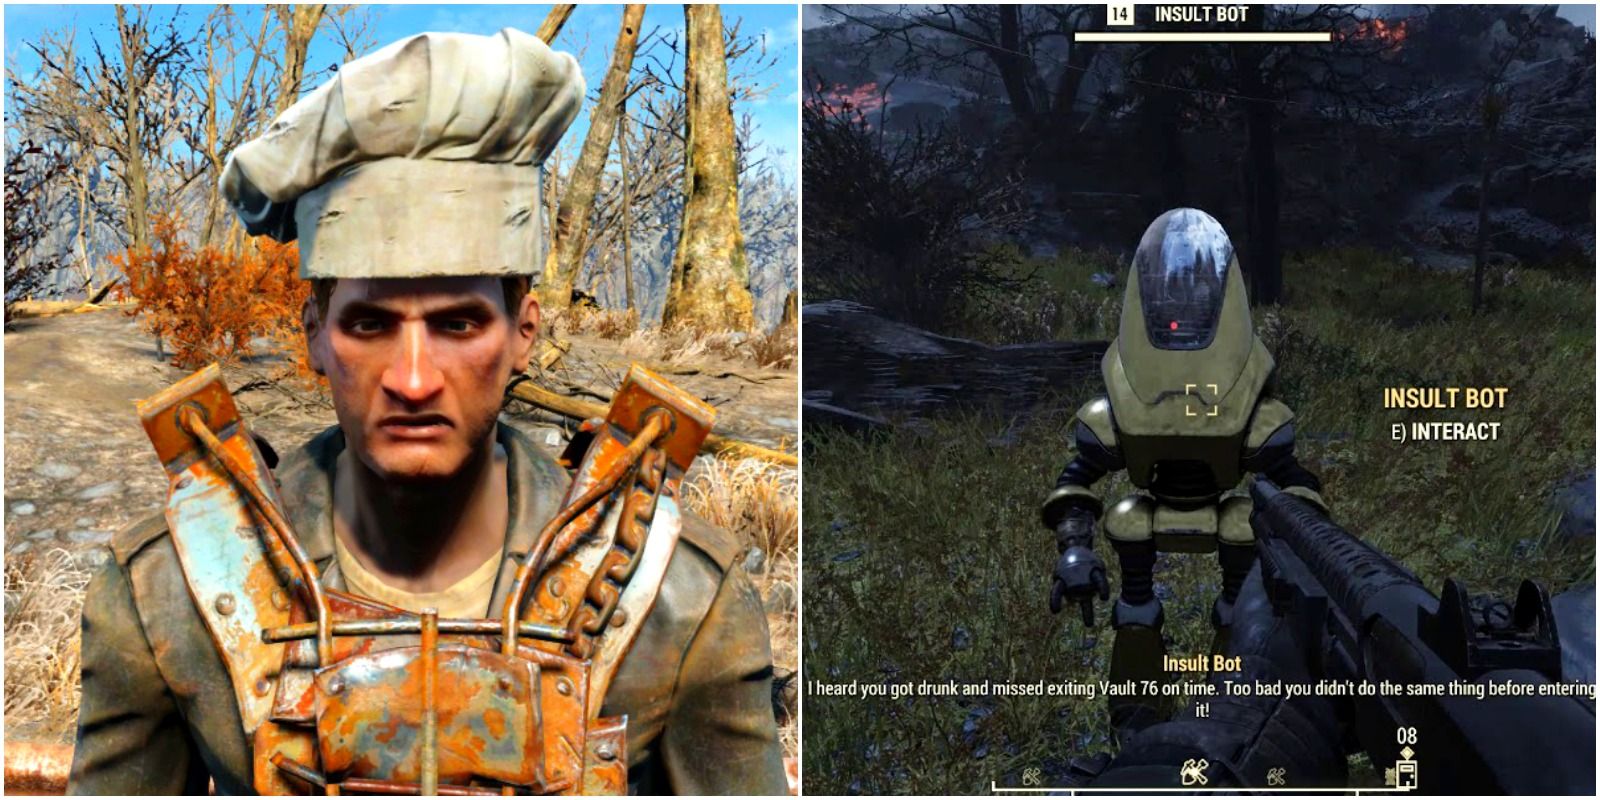 left: gruel the raider with a chef's hat from fallout 4. right: insult bot, a unique protectron from fallout 76